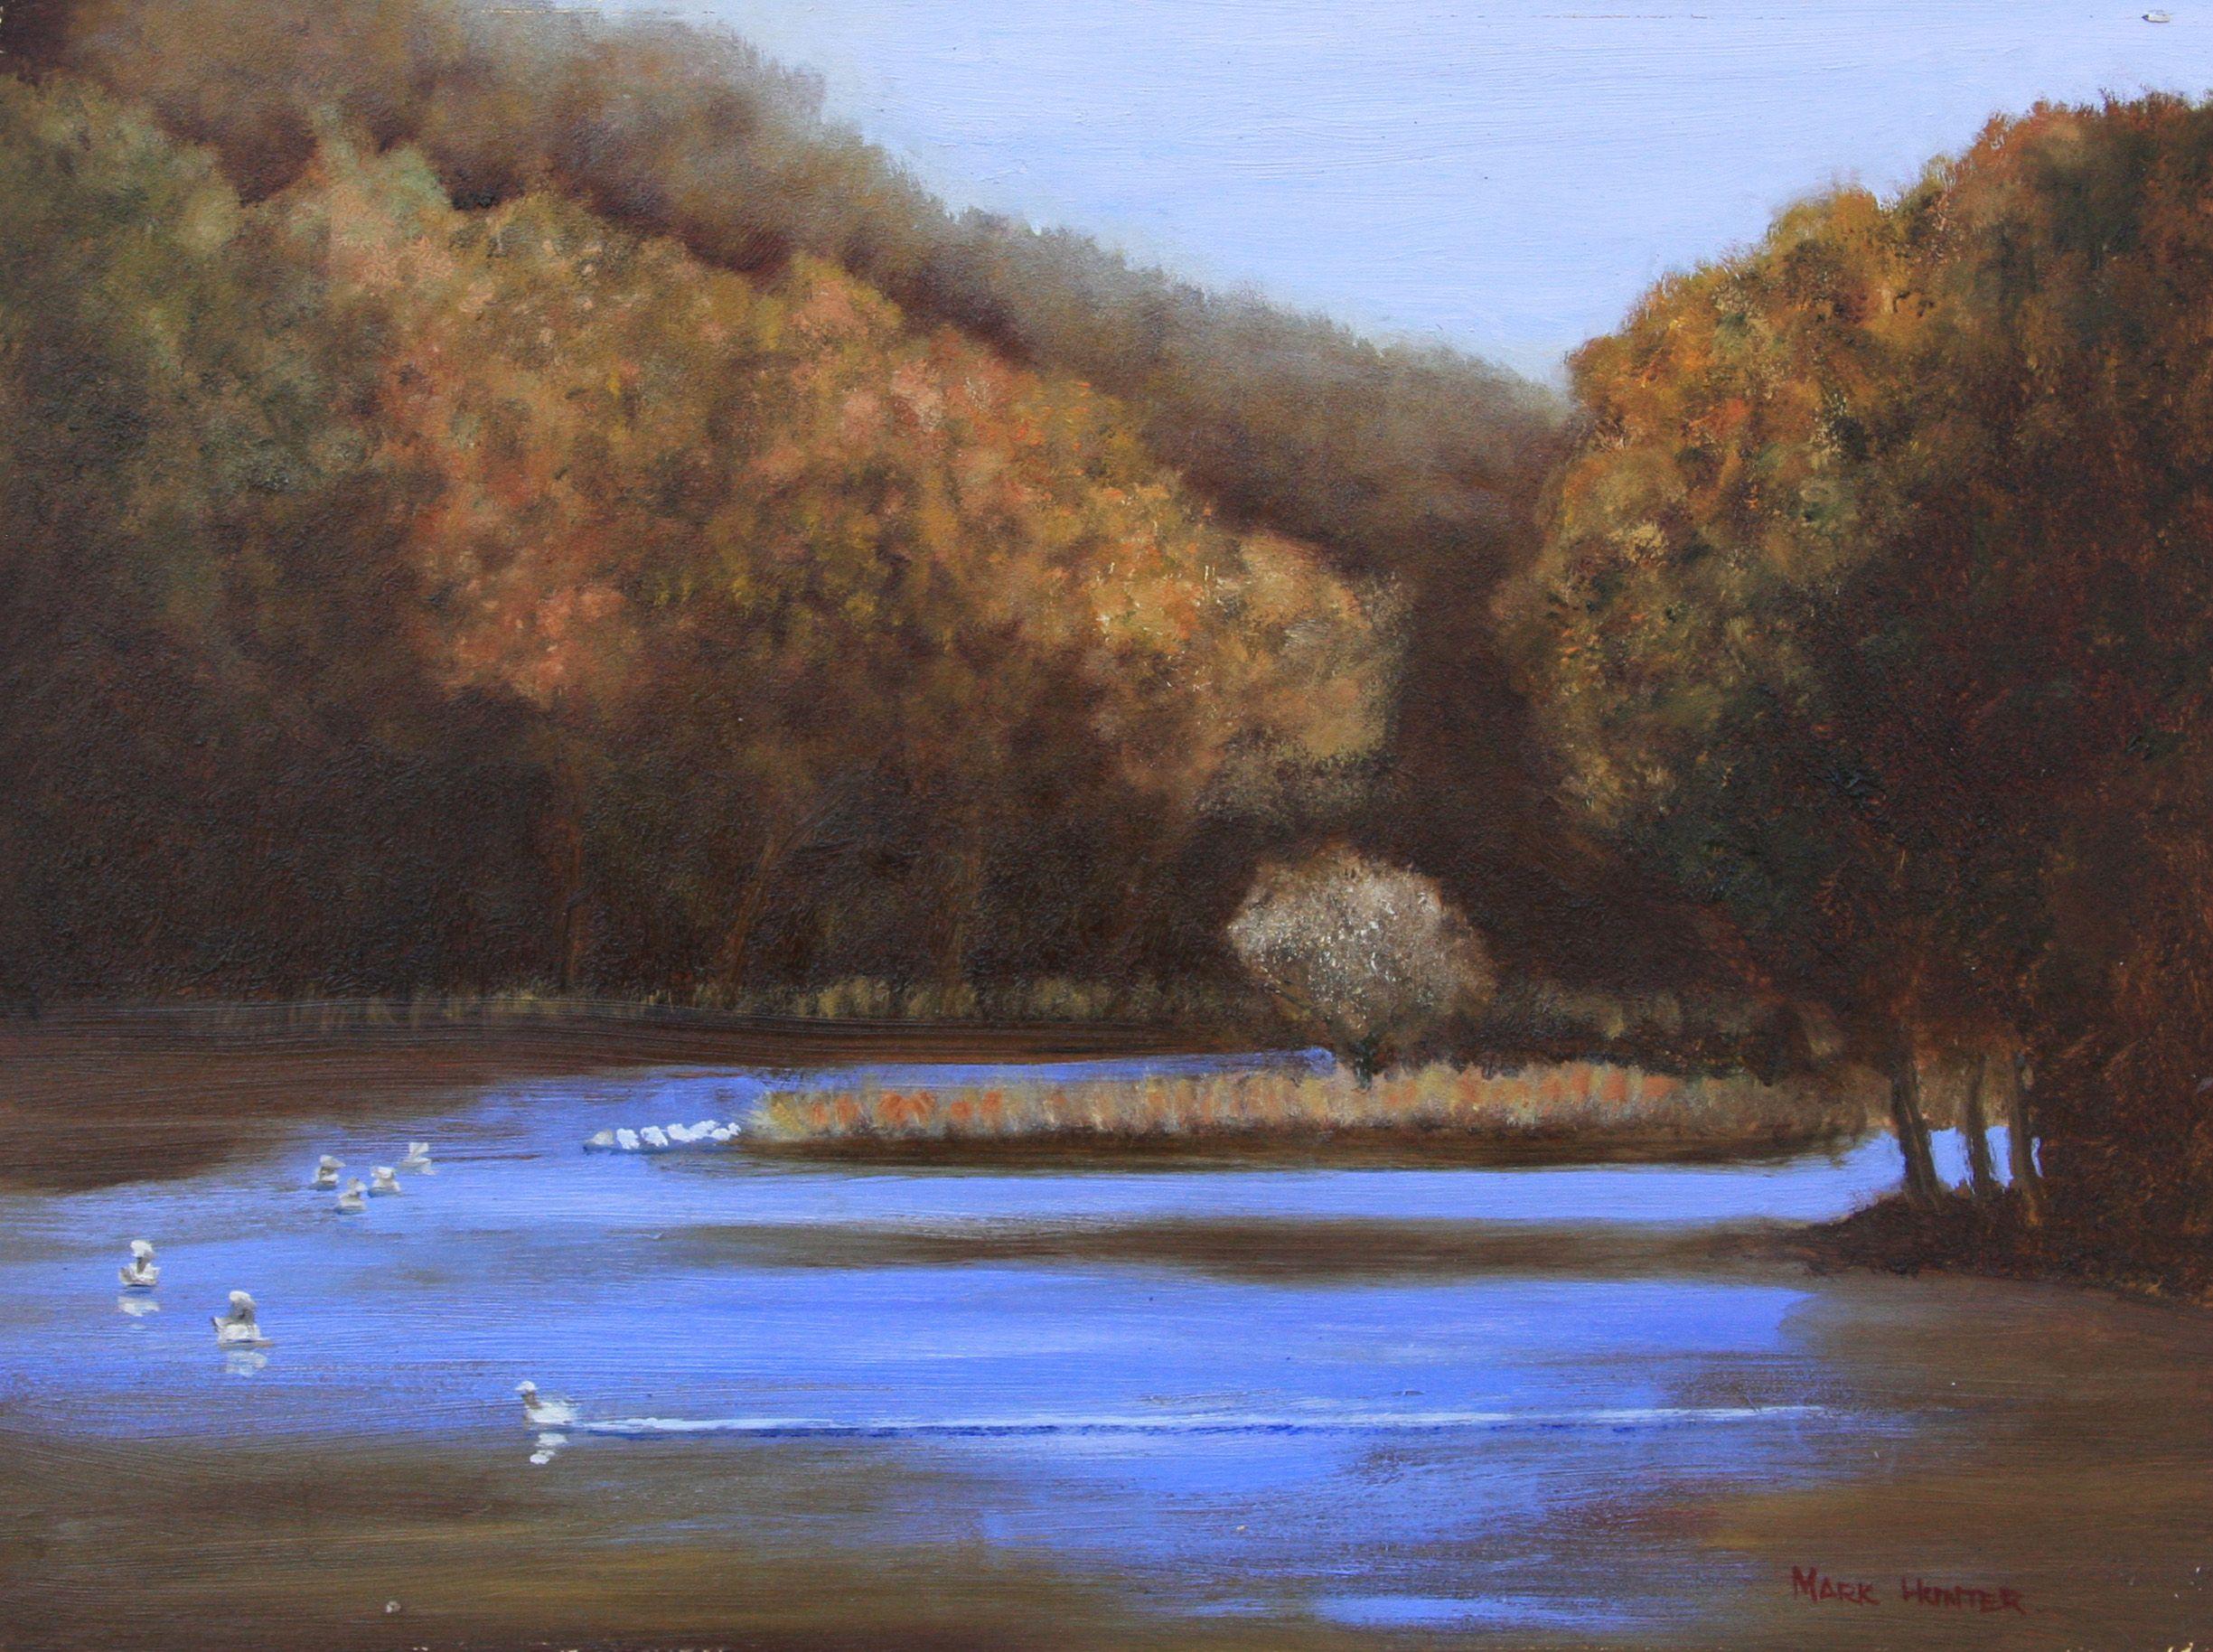 Mark Hunter Abstract Painting - Lake Solitude en Plein Air, Painting, Oil on MDF Panel